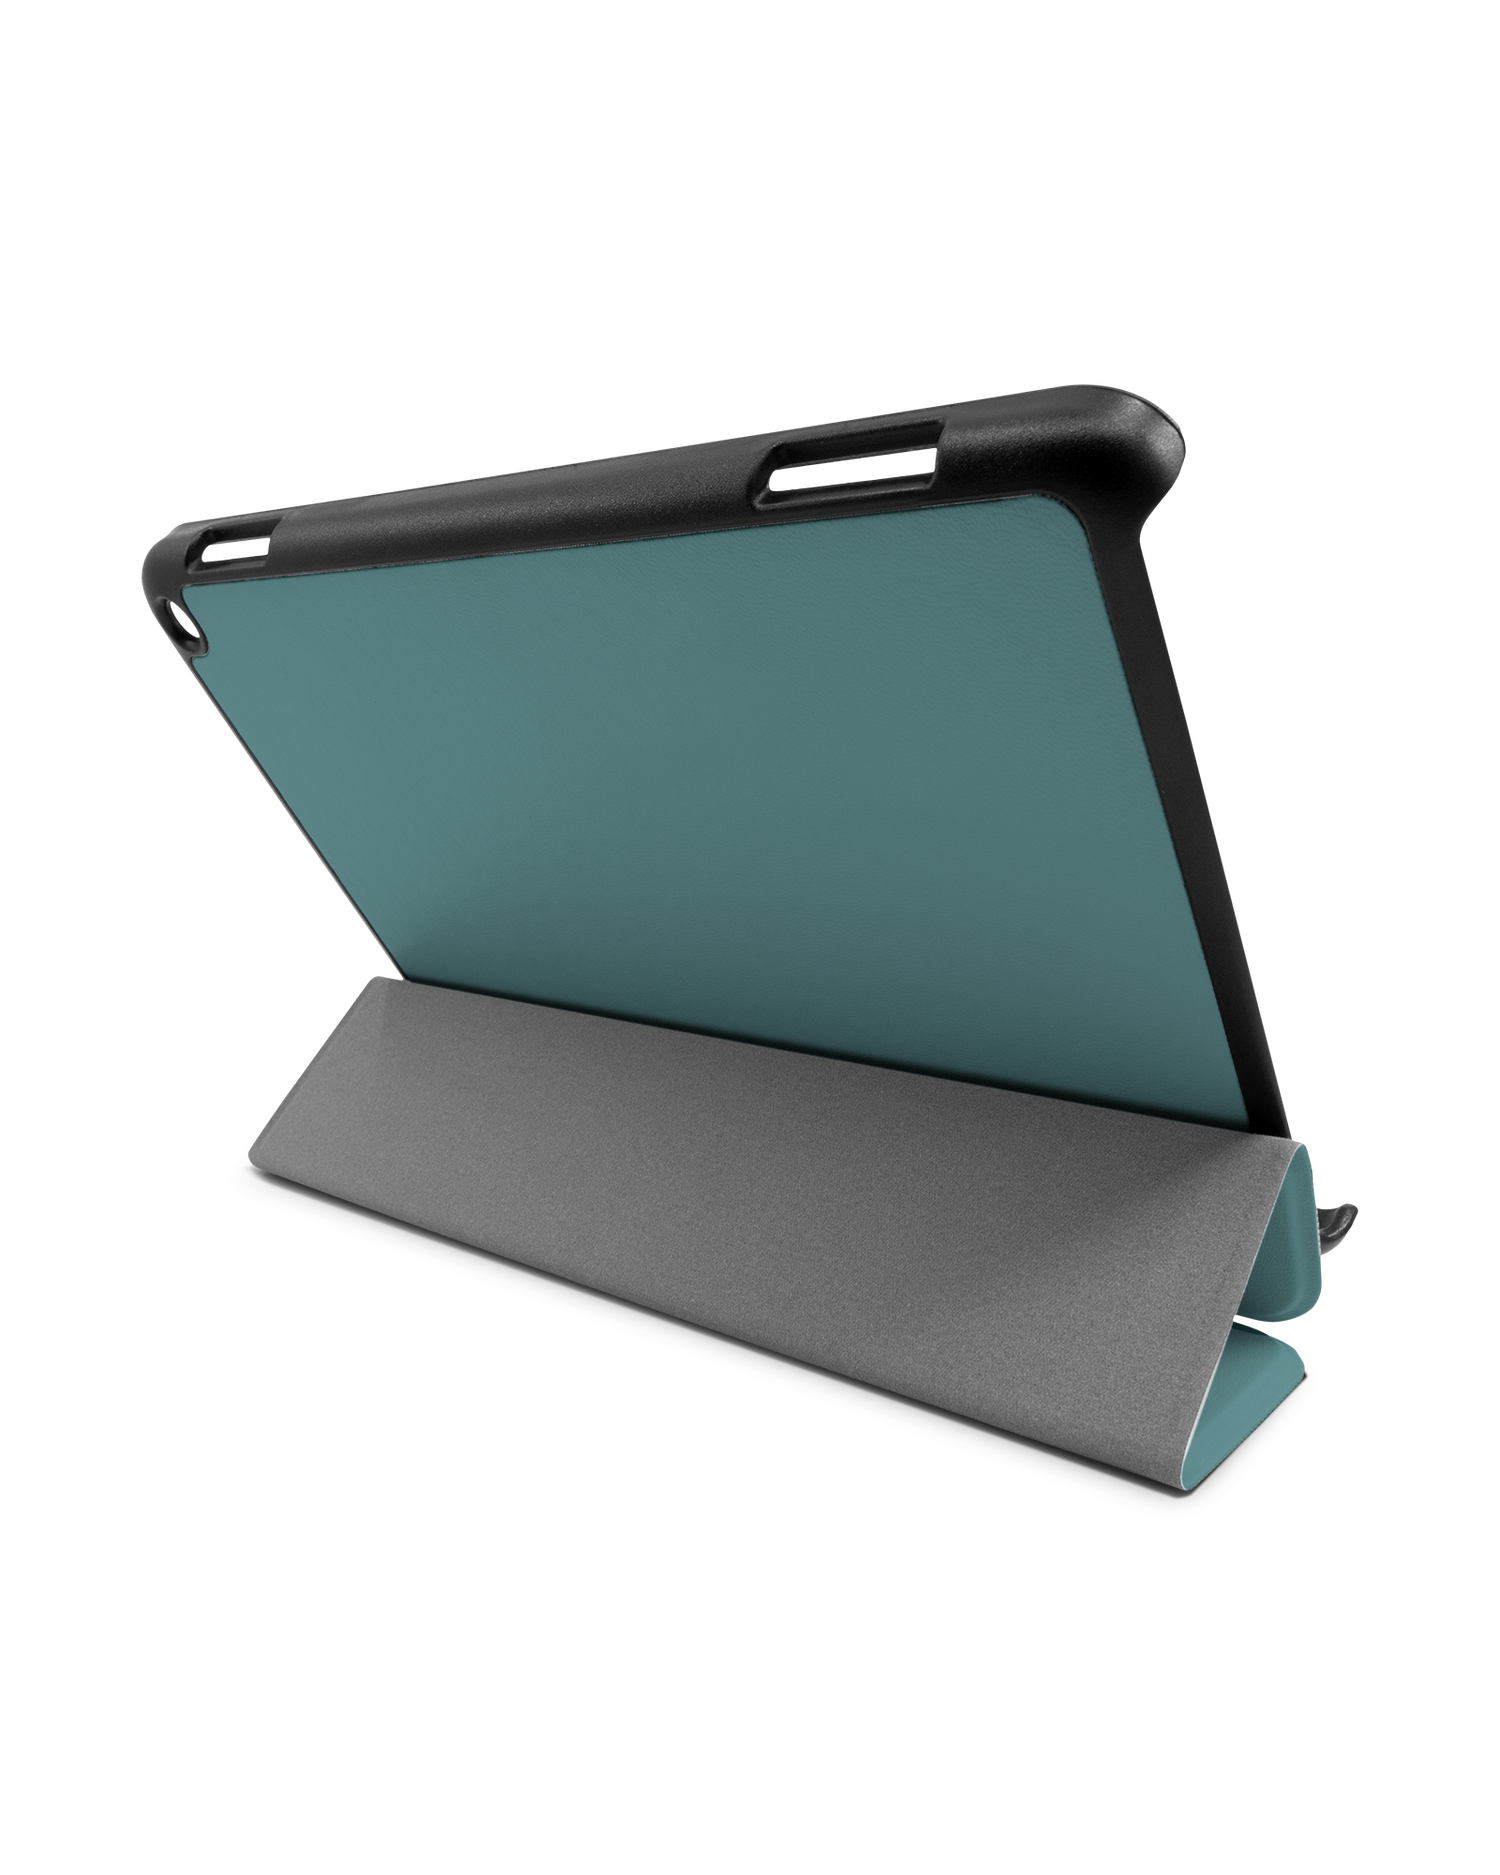 TURQUOISE Tablet Smart Case for Amazon Fire HD 8 (2022), Amazon Fire HD 8 Plus (2022), Amazon Fire HD 8 (2020), Amazon Fire HD 8 Plus (2020): Used as Stand